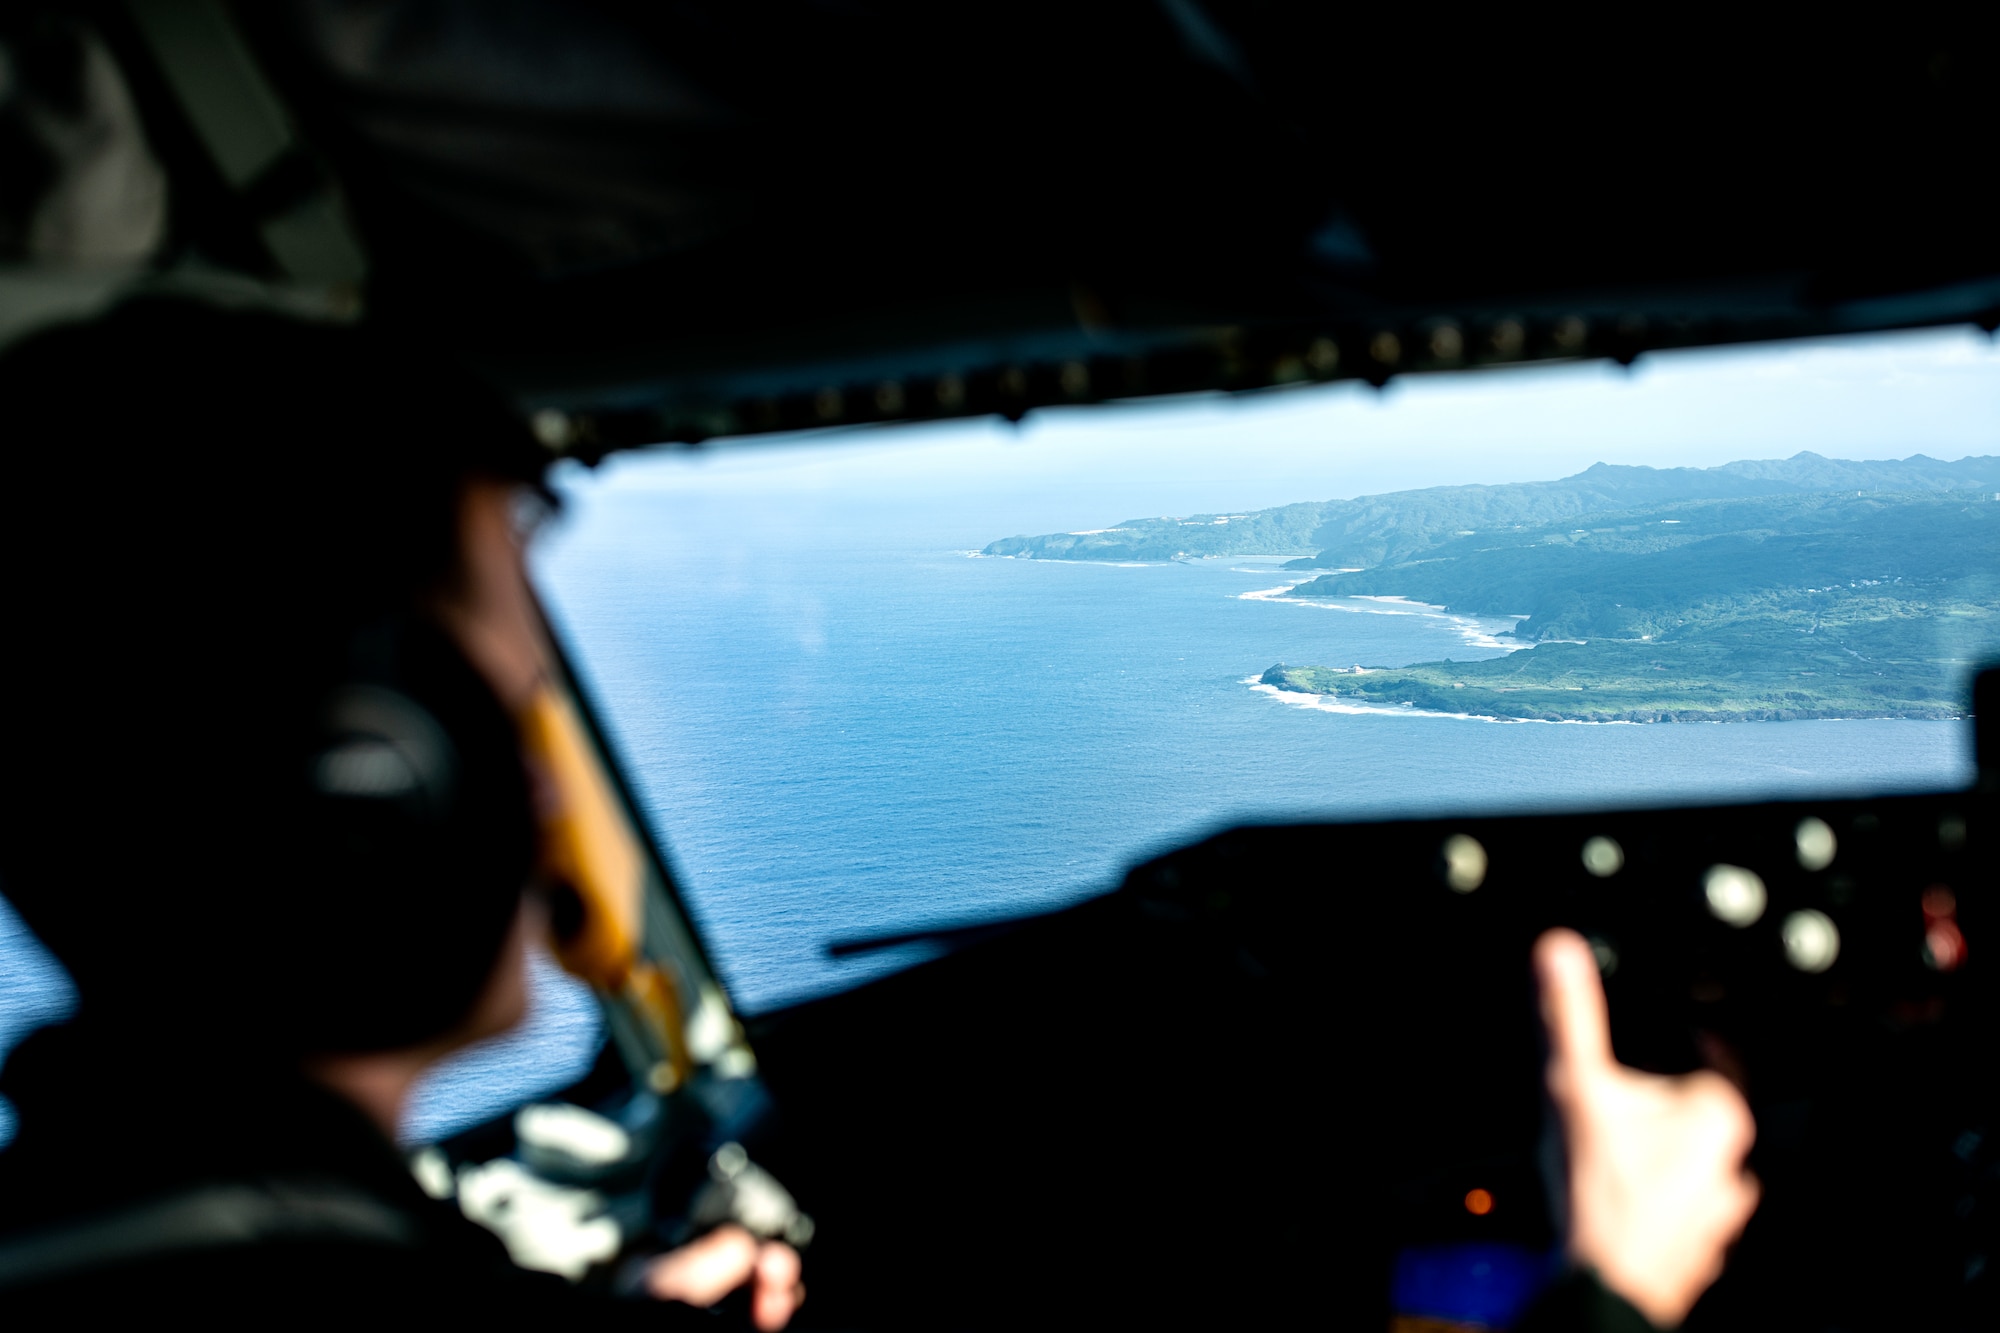 Okinawa prefecture comes into view as a 909th Air Refueling Squadron KC-135 Stratotanker approaches after an aerial refueling mission over the Pacific Ocean, Oct. 14, 2021. Aerial refueling capabilities extend airborne training time and combat radius, ensuring U.S. and allied nation aircraft are postured to maintain regional peace and stability within the Indo-Pacific area of responsibility. (U.S. Air Force photo by Senior Airman Jessi Monte)